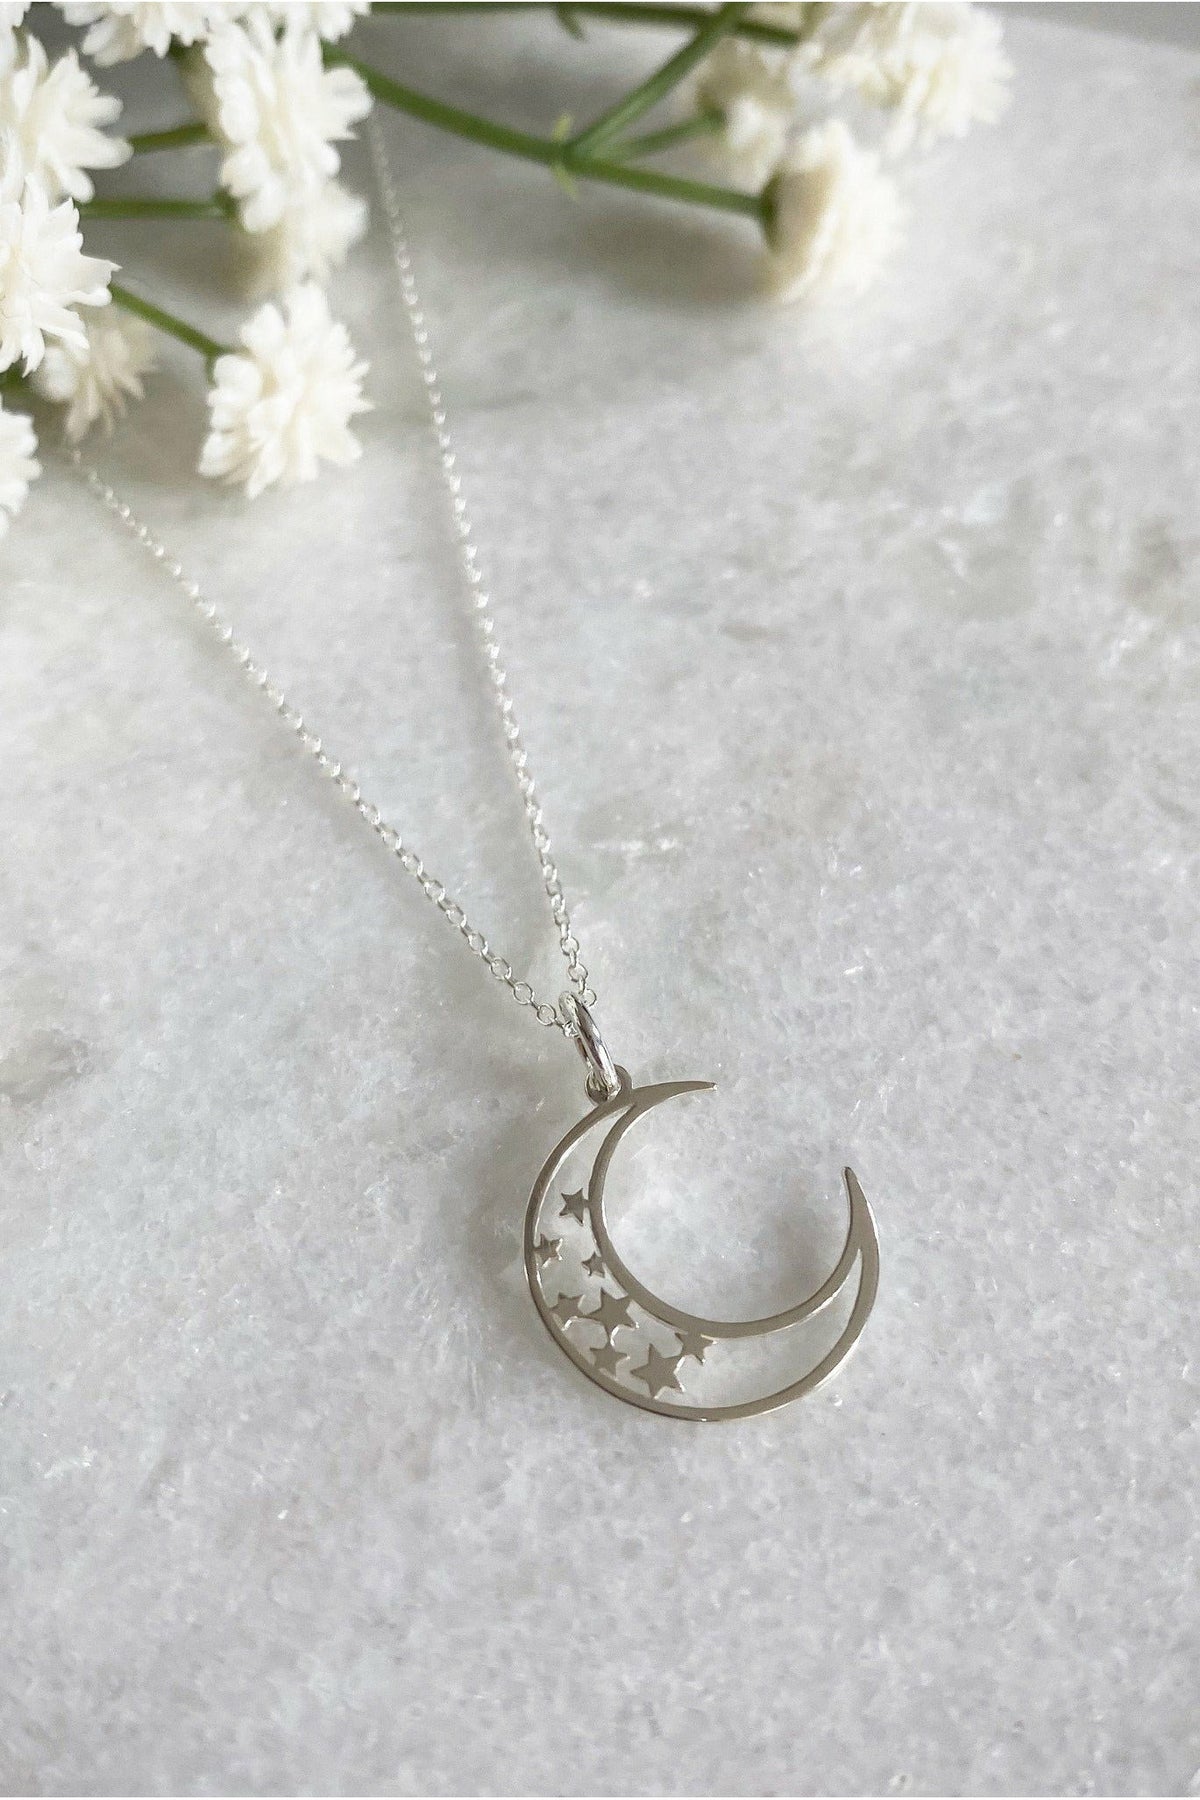 Cressida Sterling Silver Moon Necklace Cressida Sterling Silver Moon Necklace